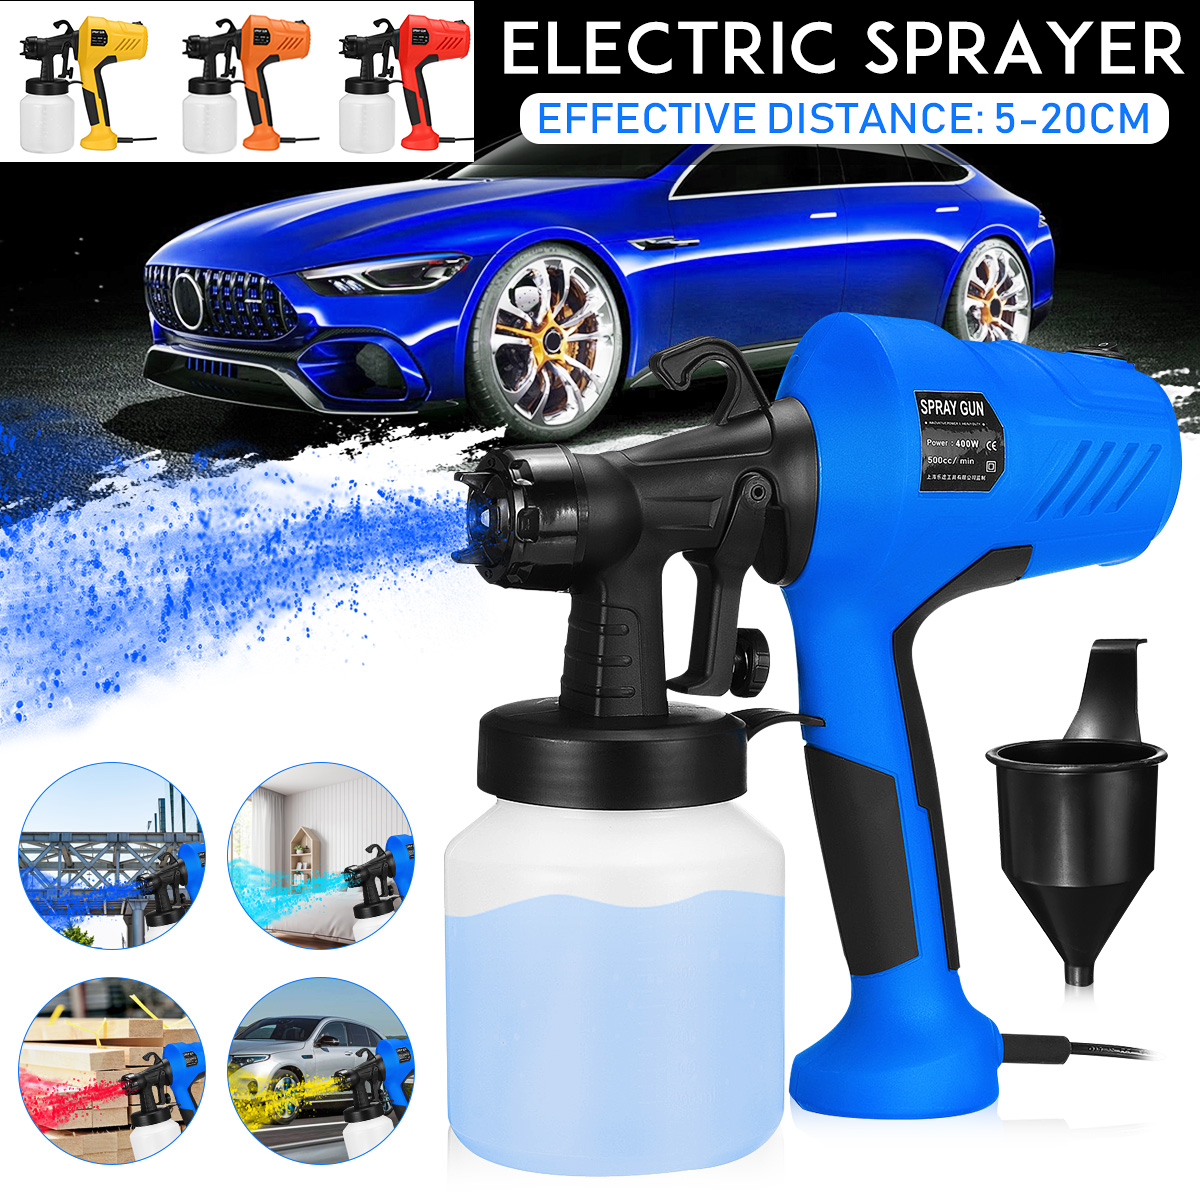 400W-800ml-Electric-Paint-Sprayer-Flow-Control-Airbrush-Easy-Spraying-Painting-Tool-1761119-1